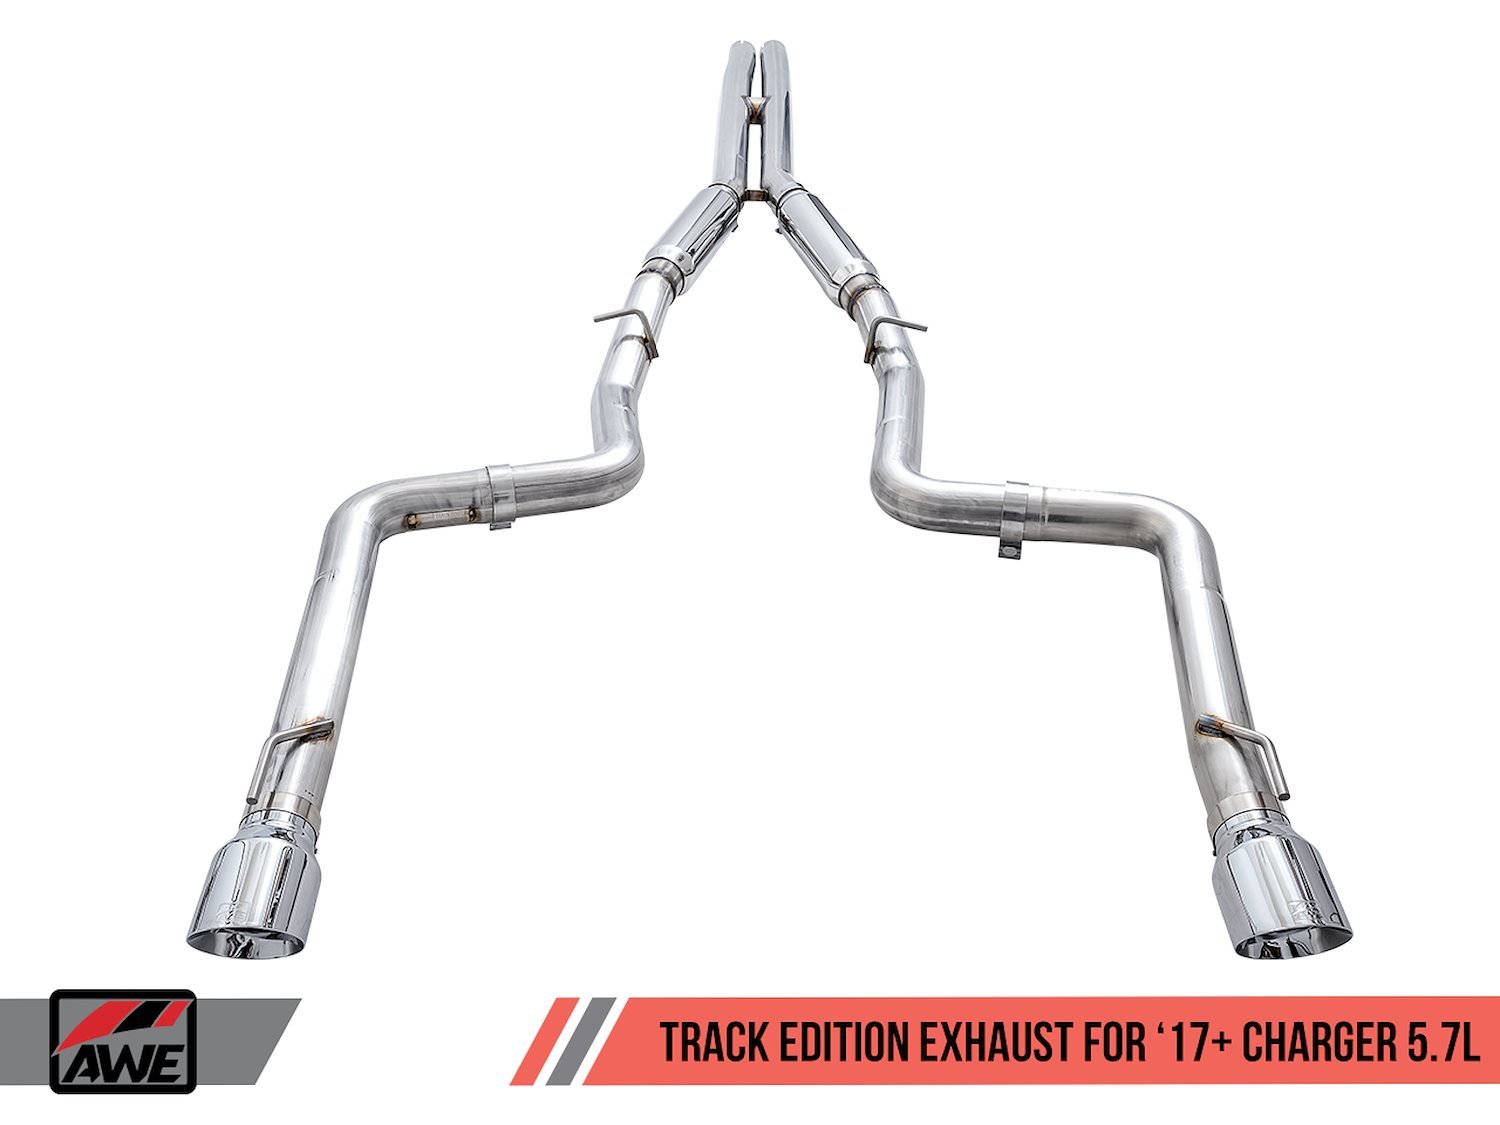 AWE Track Edition Exhaust for 17+ Charger 5.7 - Chrome Silver Tips